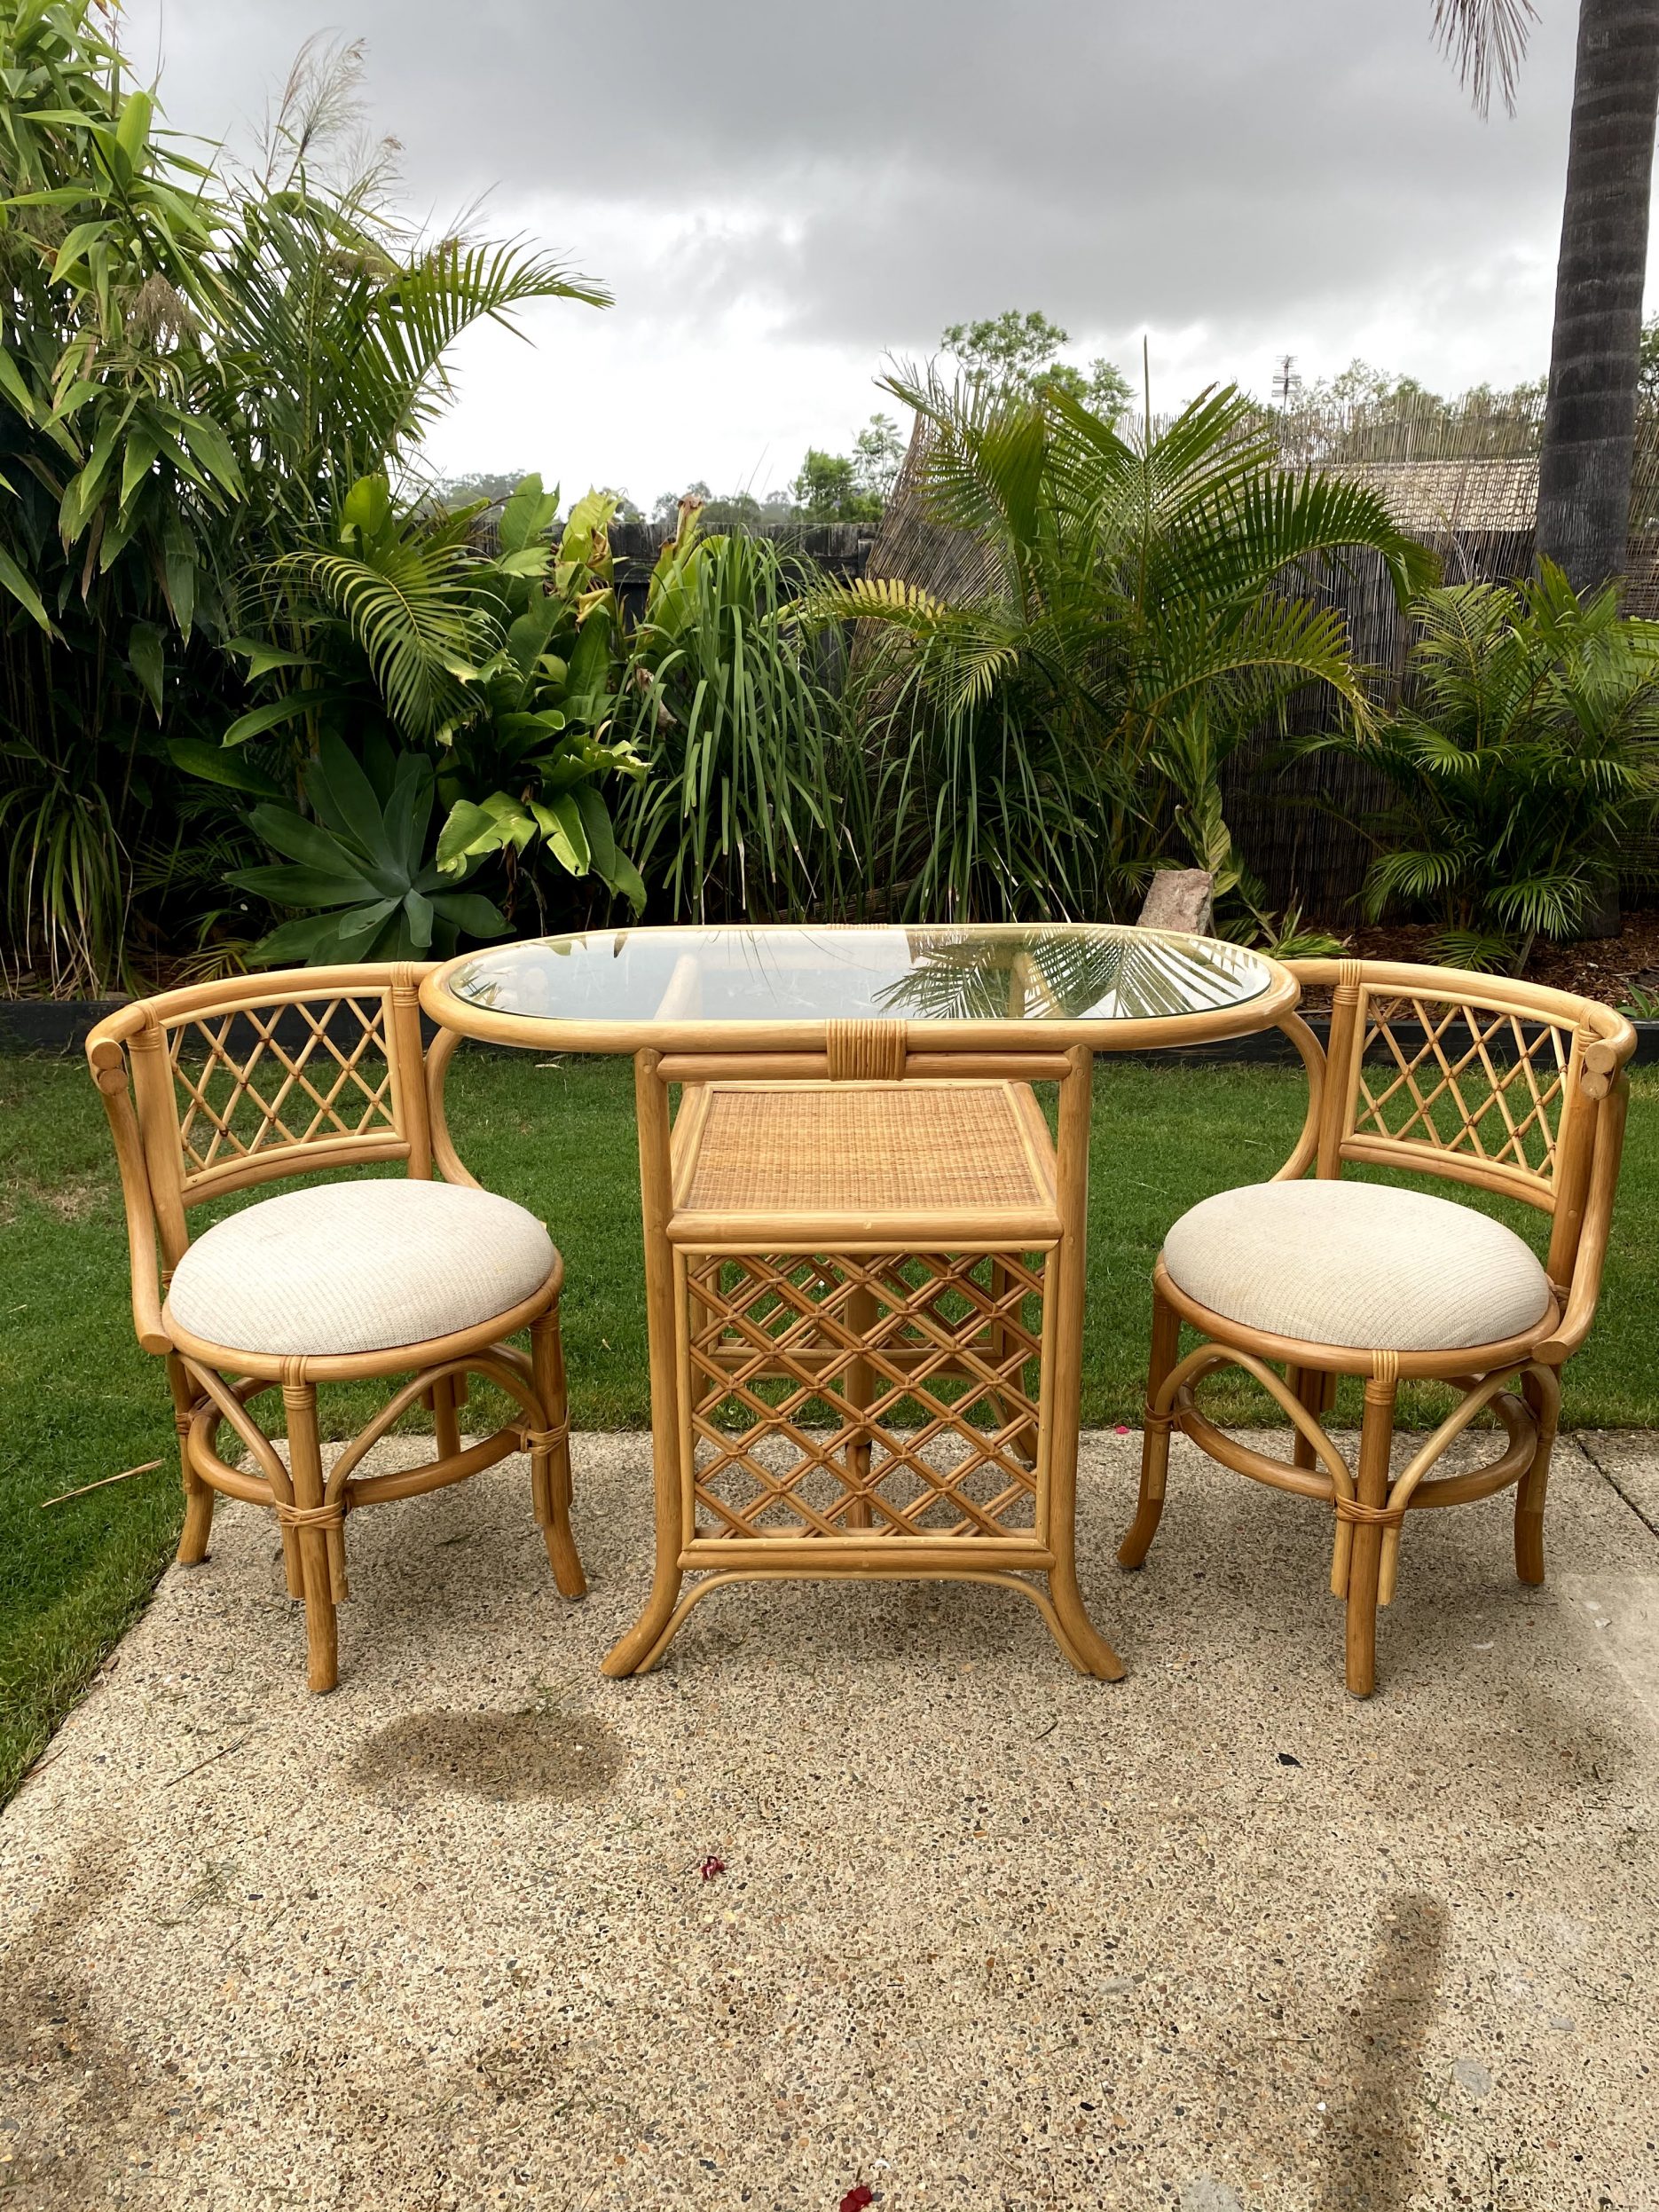 Cane table and chairs